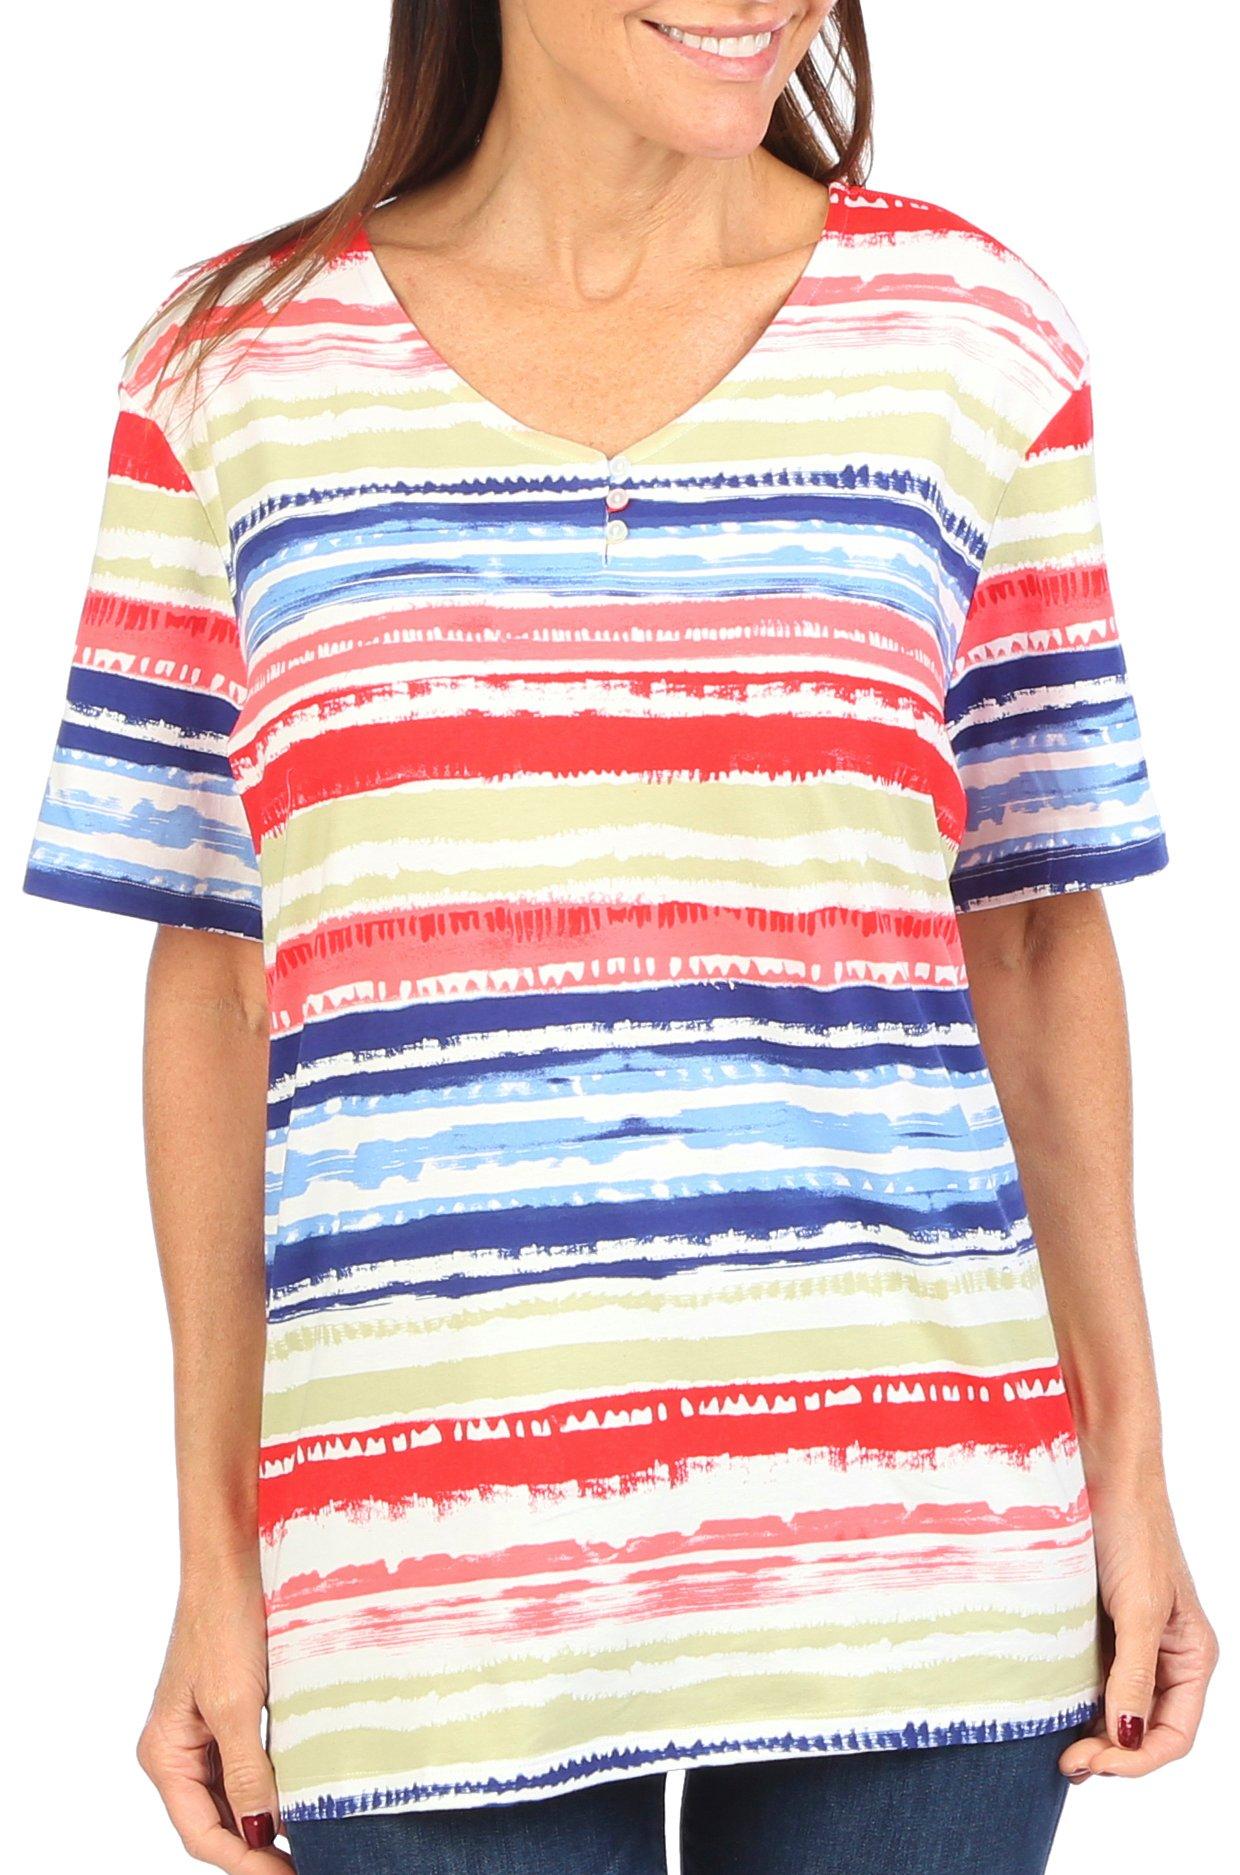 Coral Bay Womens Stripe Henley Short Sleeve Top